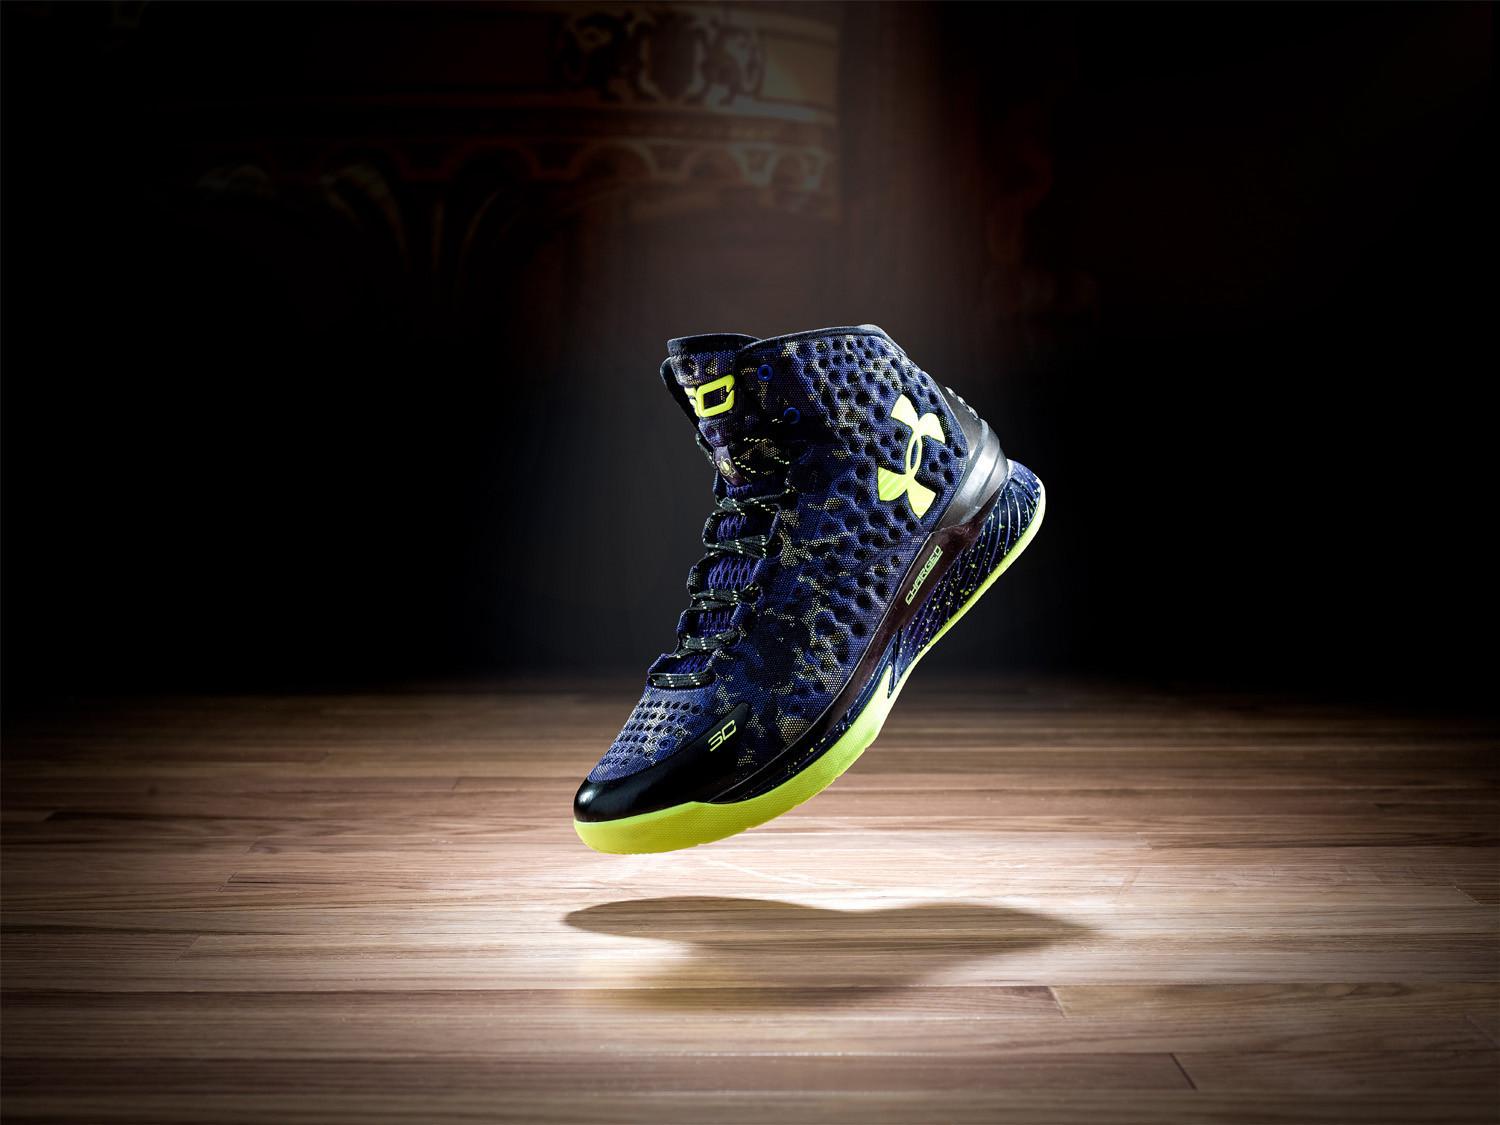 Stephen Curry Shoes Wallpapers - Wallpaper Cave